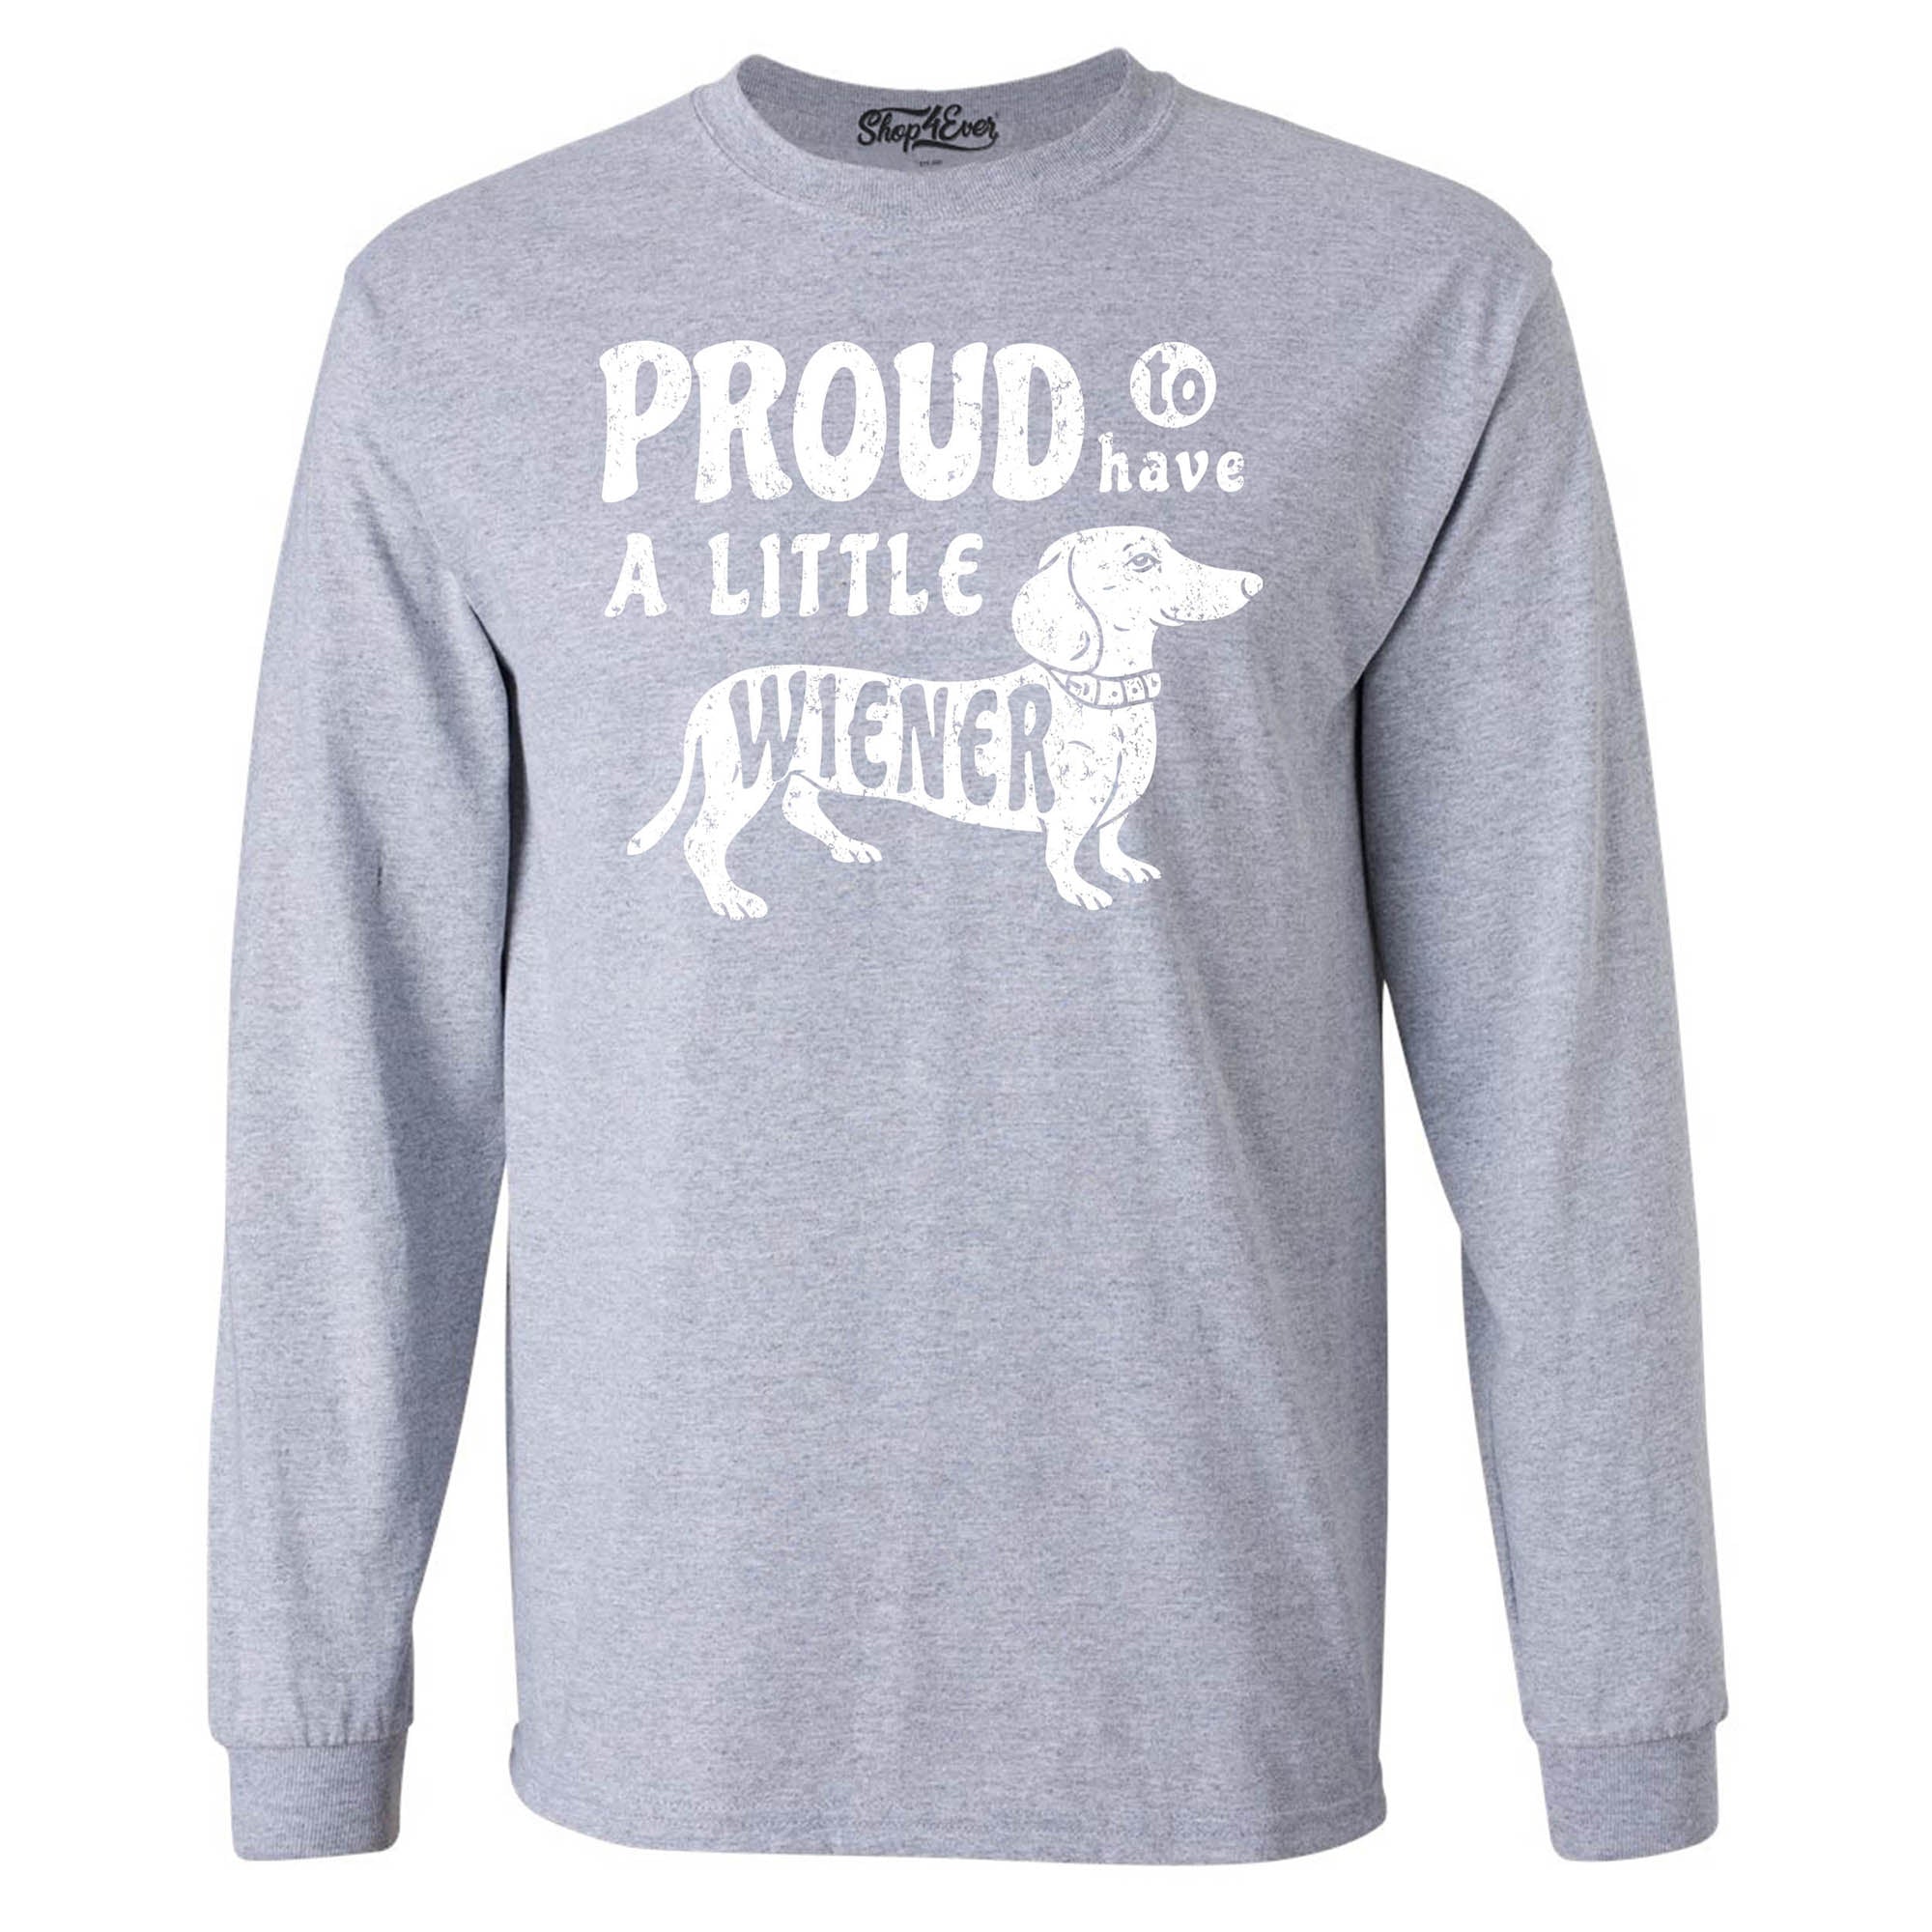 Proud to Have a Little Weiner Funny Dachshund Dog Long Sleeve Shirt